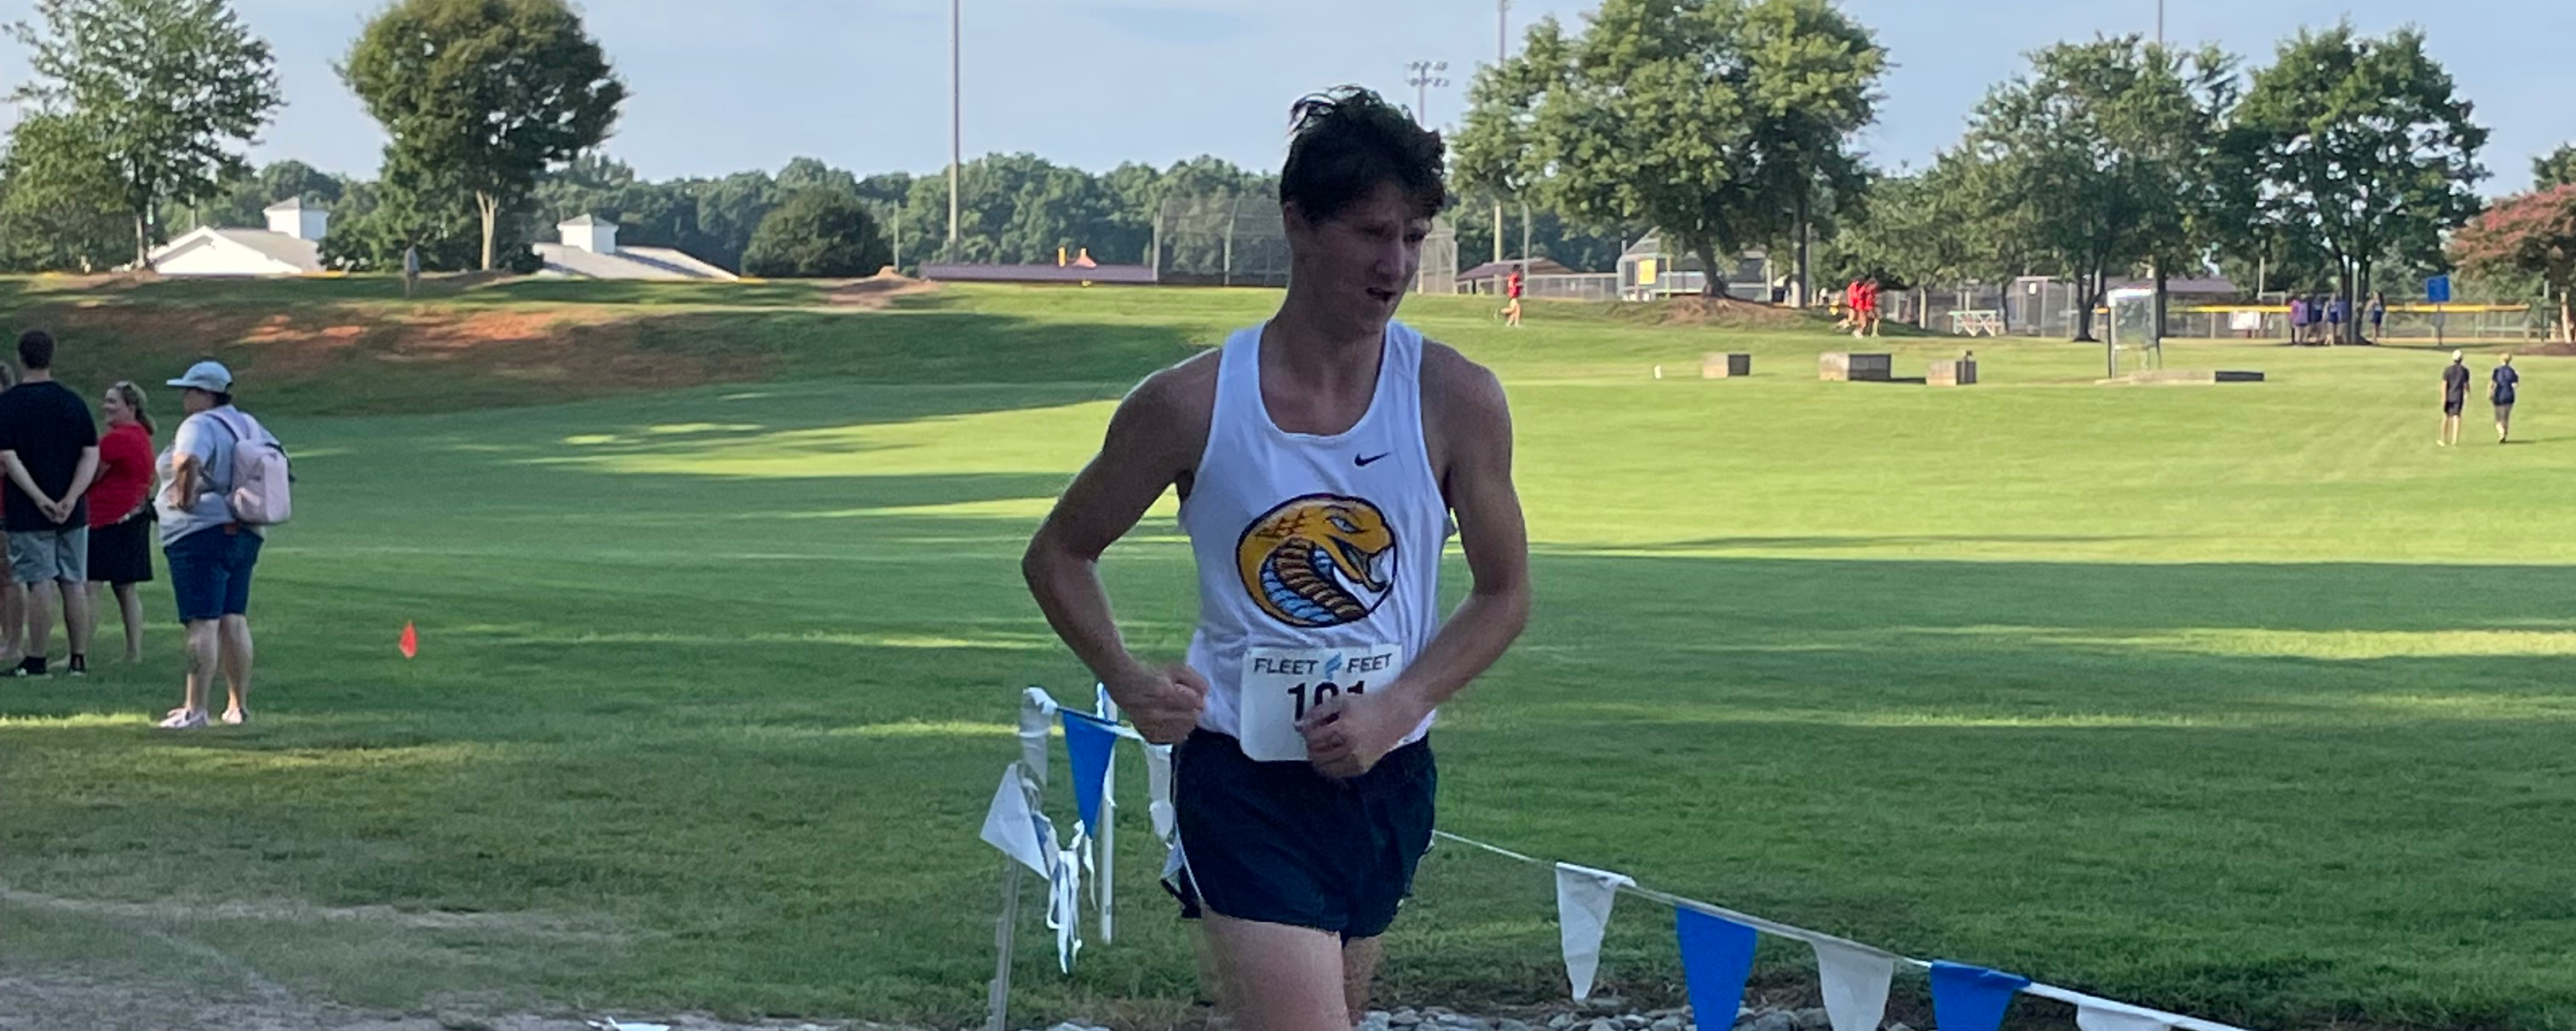 Men's Cross Country Competes at the Newberry Cross Country Invitational